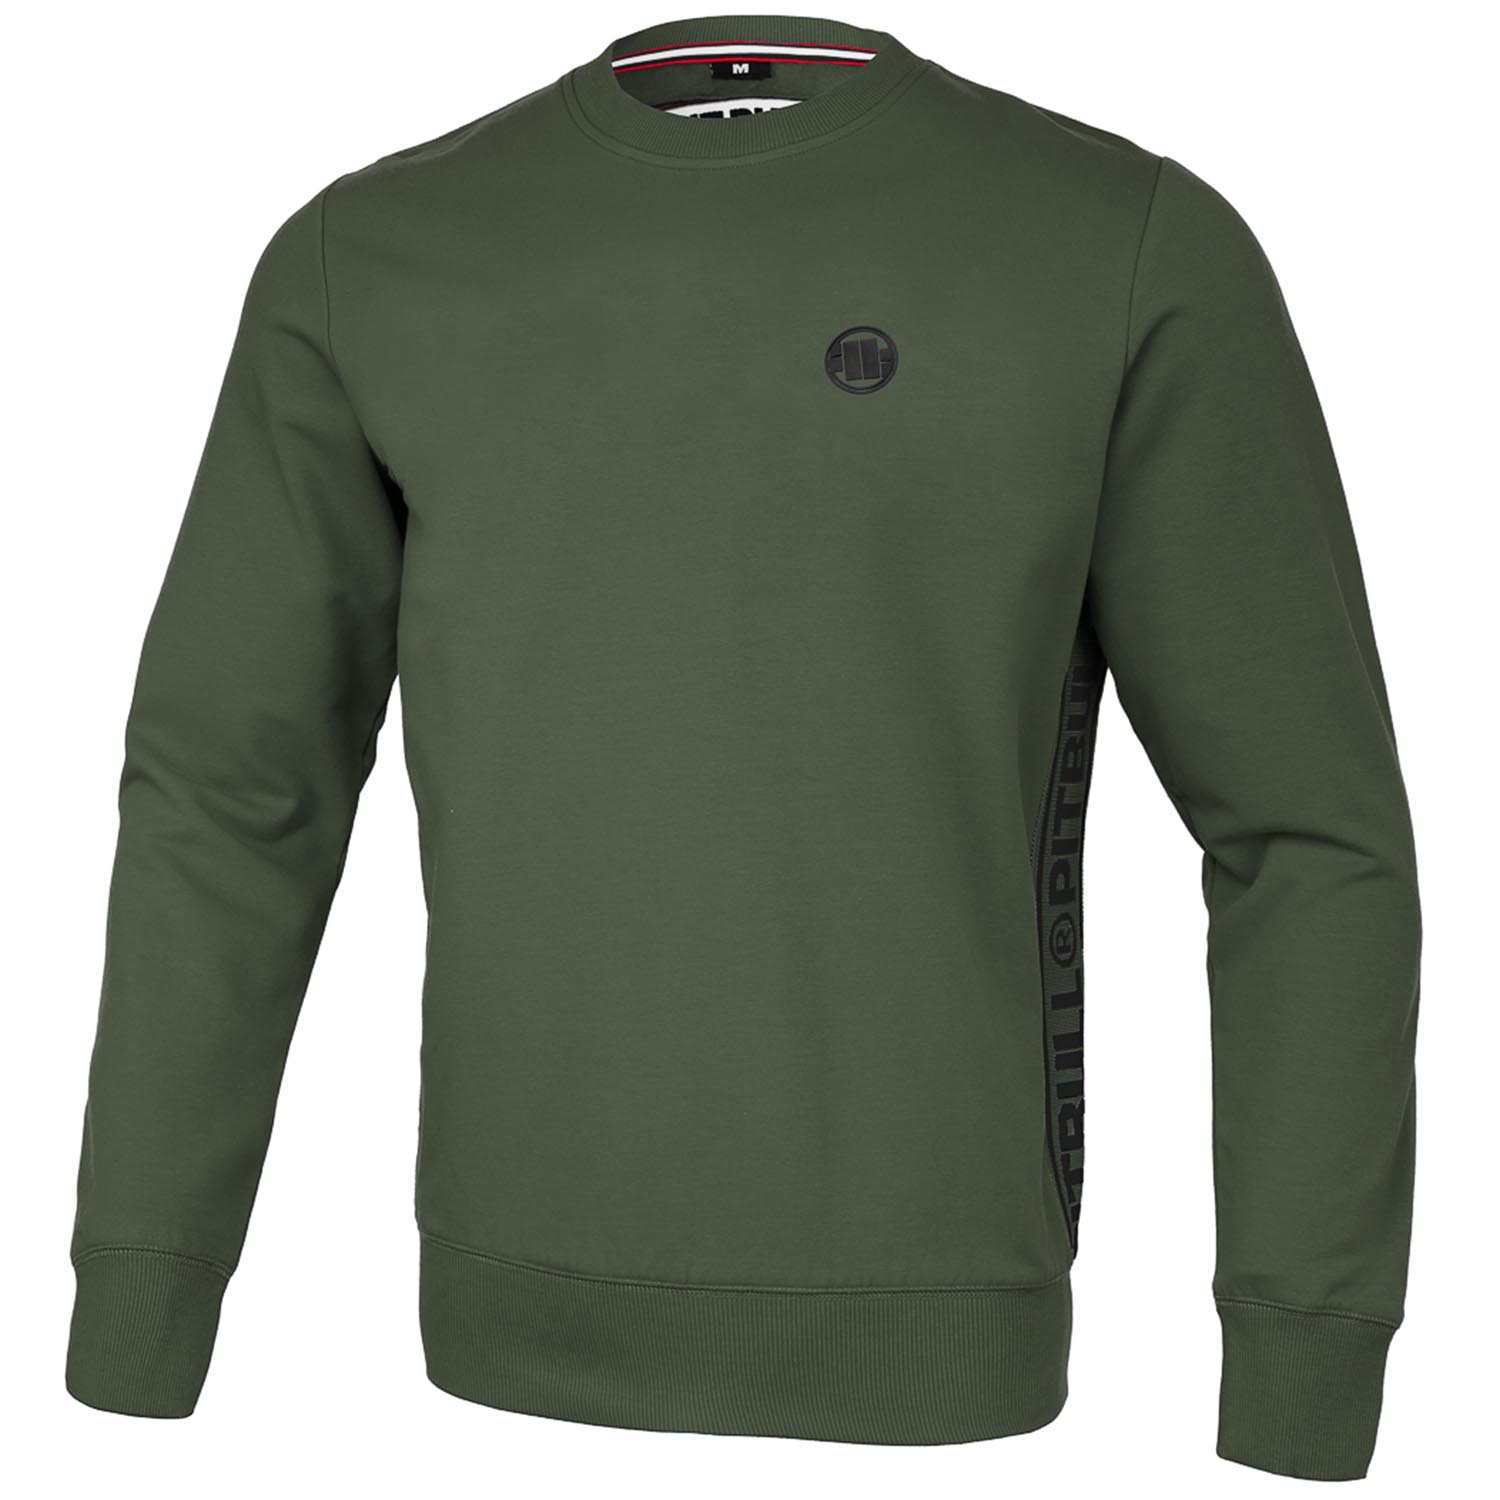 Pit Bull West Coast Pullover, Ascot French terry, olive